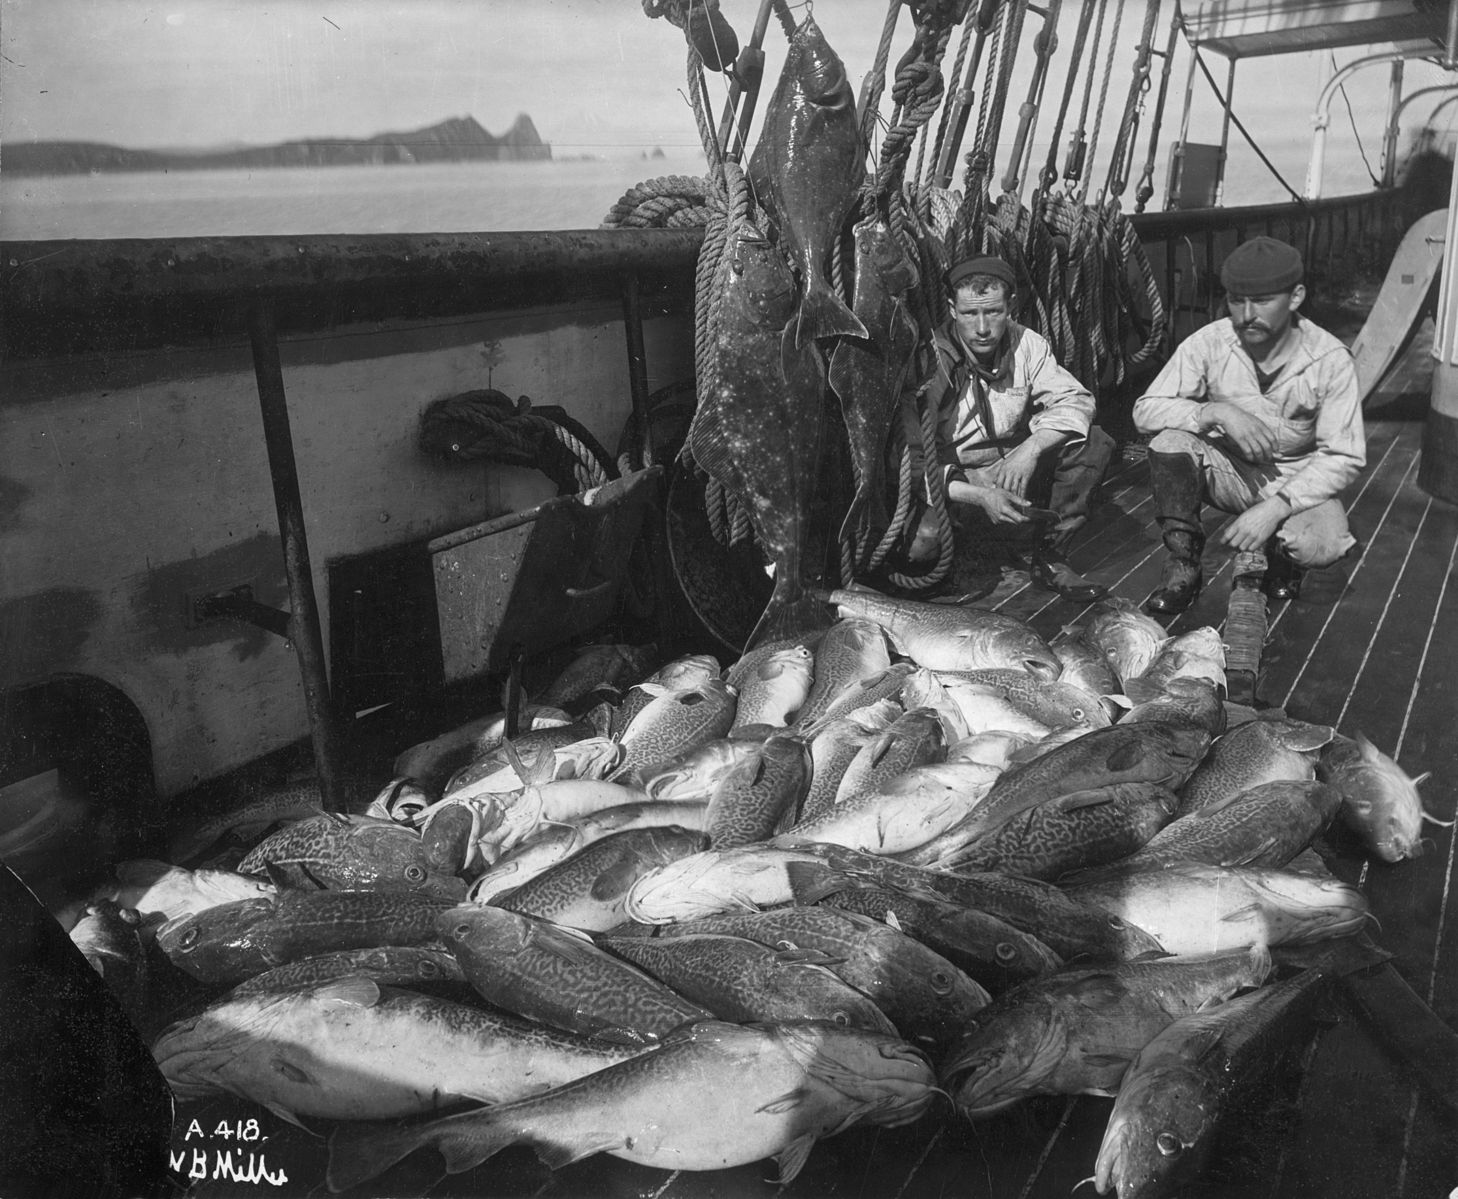 A cod and halibut fishing vessel from before 1927